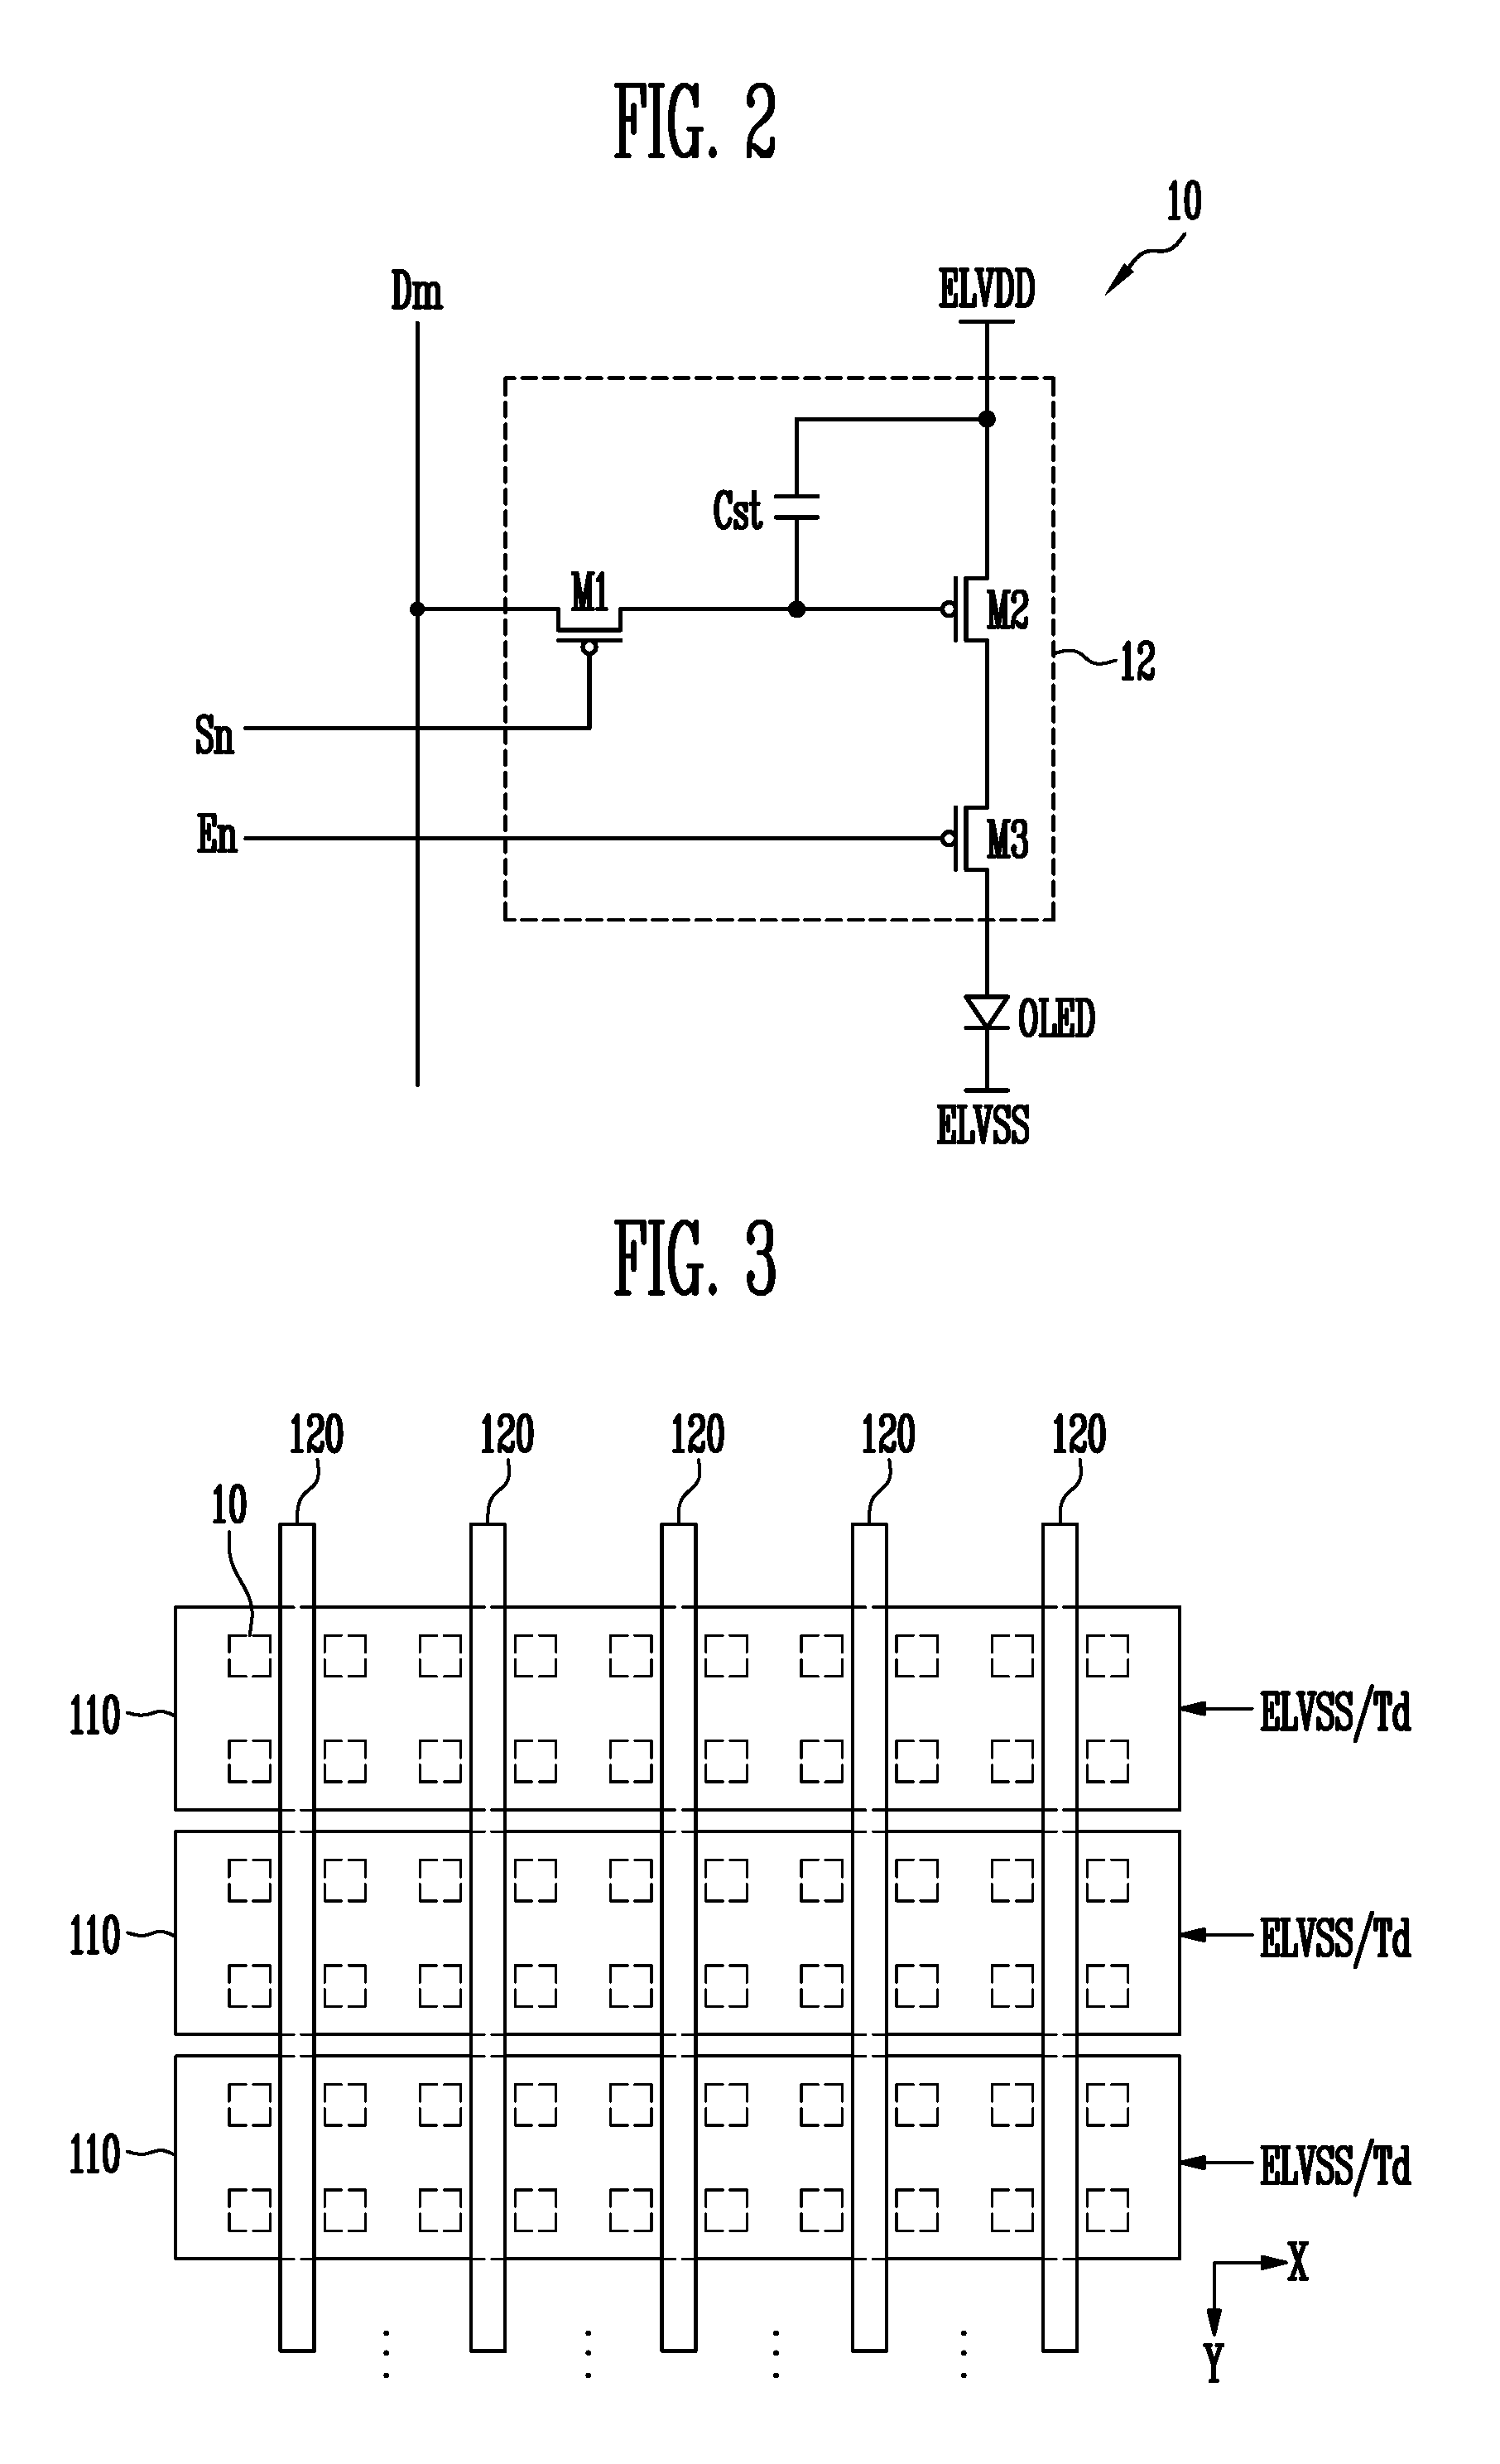 Touch screen display device